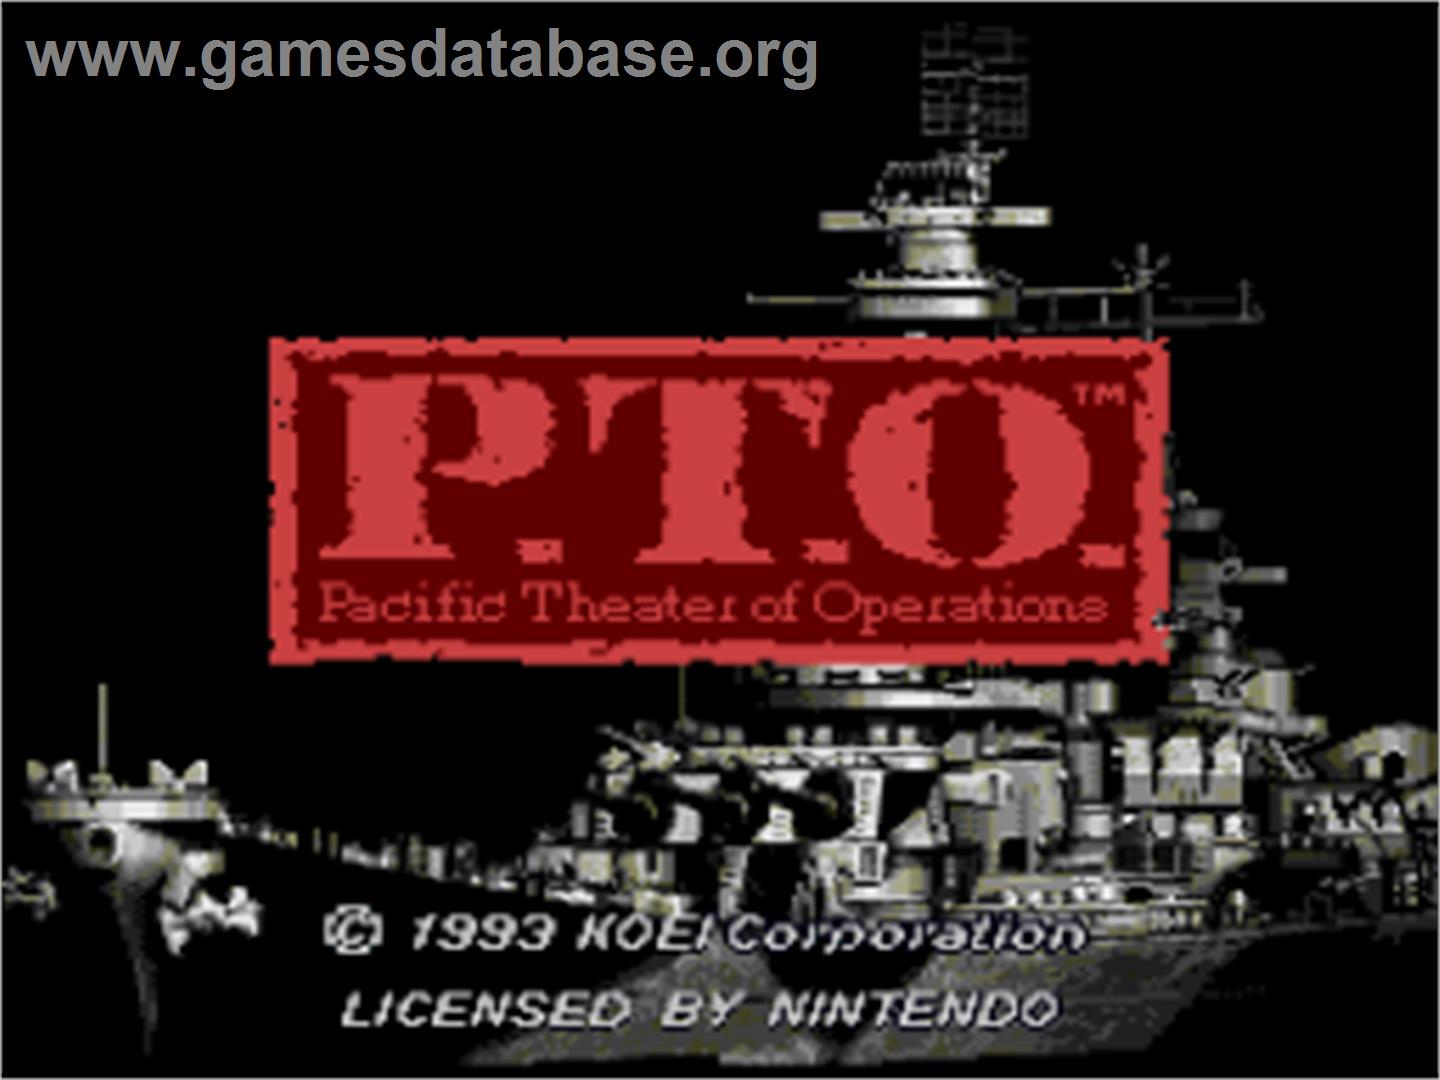 P.T.O.: Pacific Theater of Operations - Nintendo SNES - Artwork - Title Screen